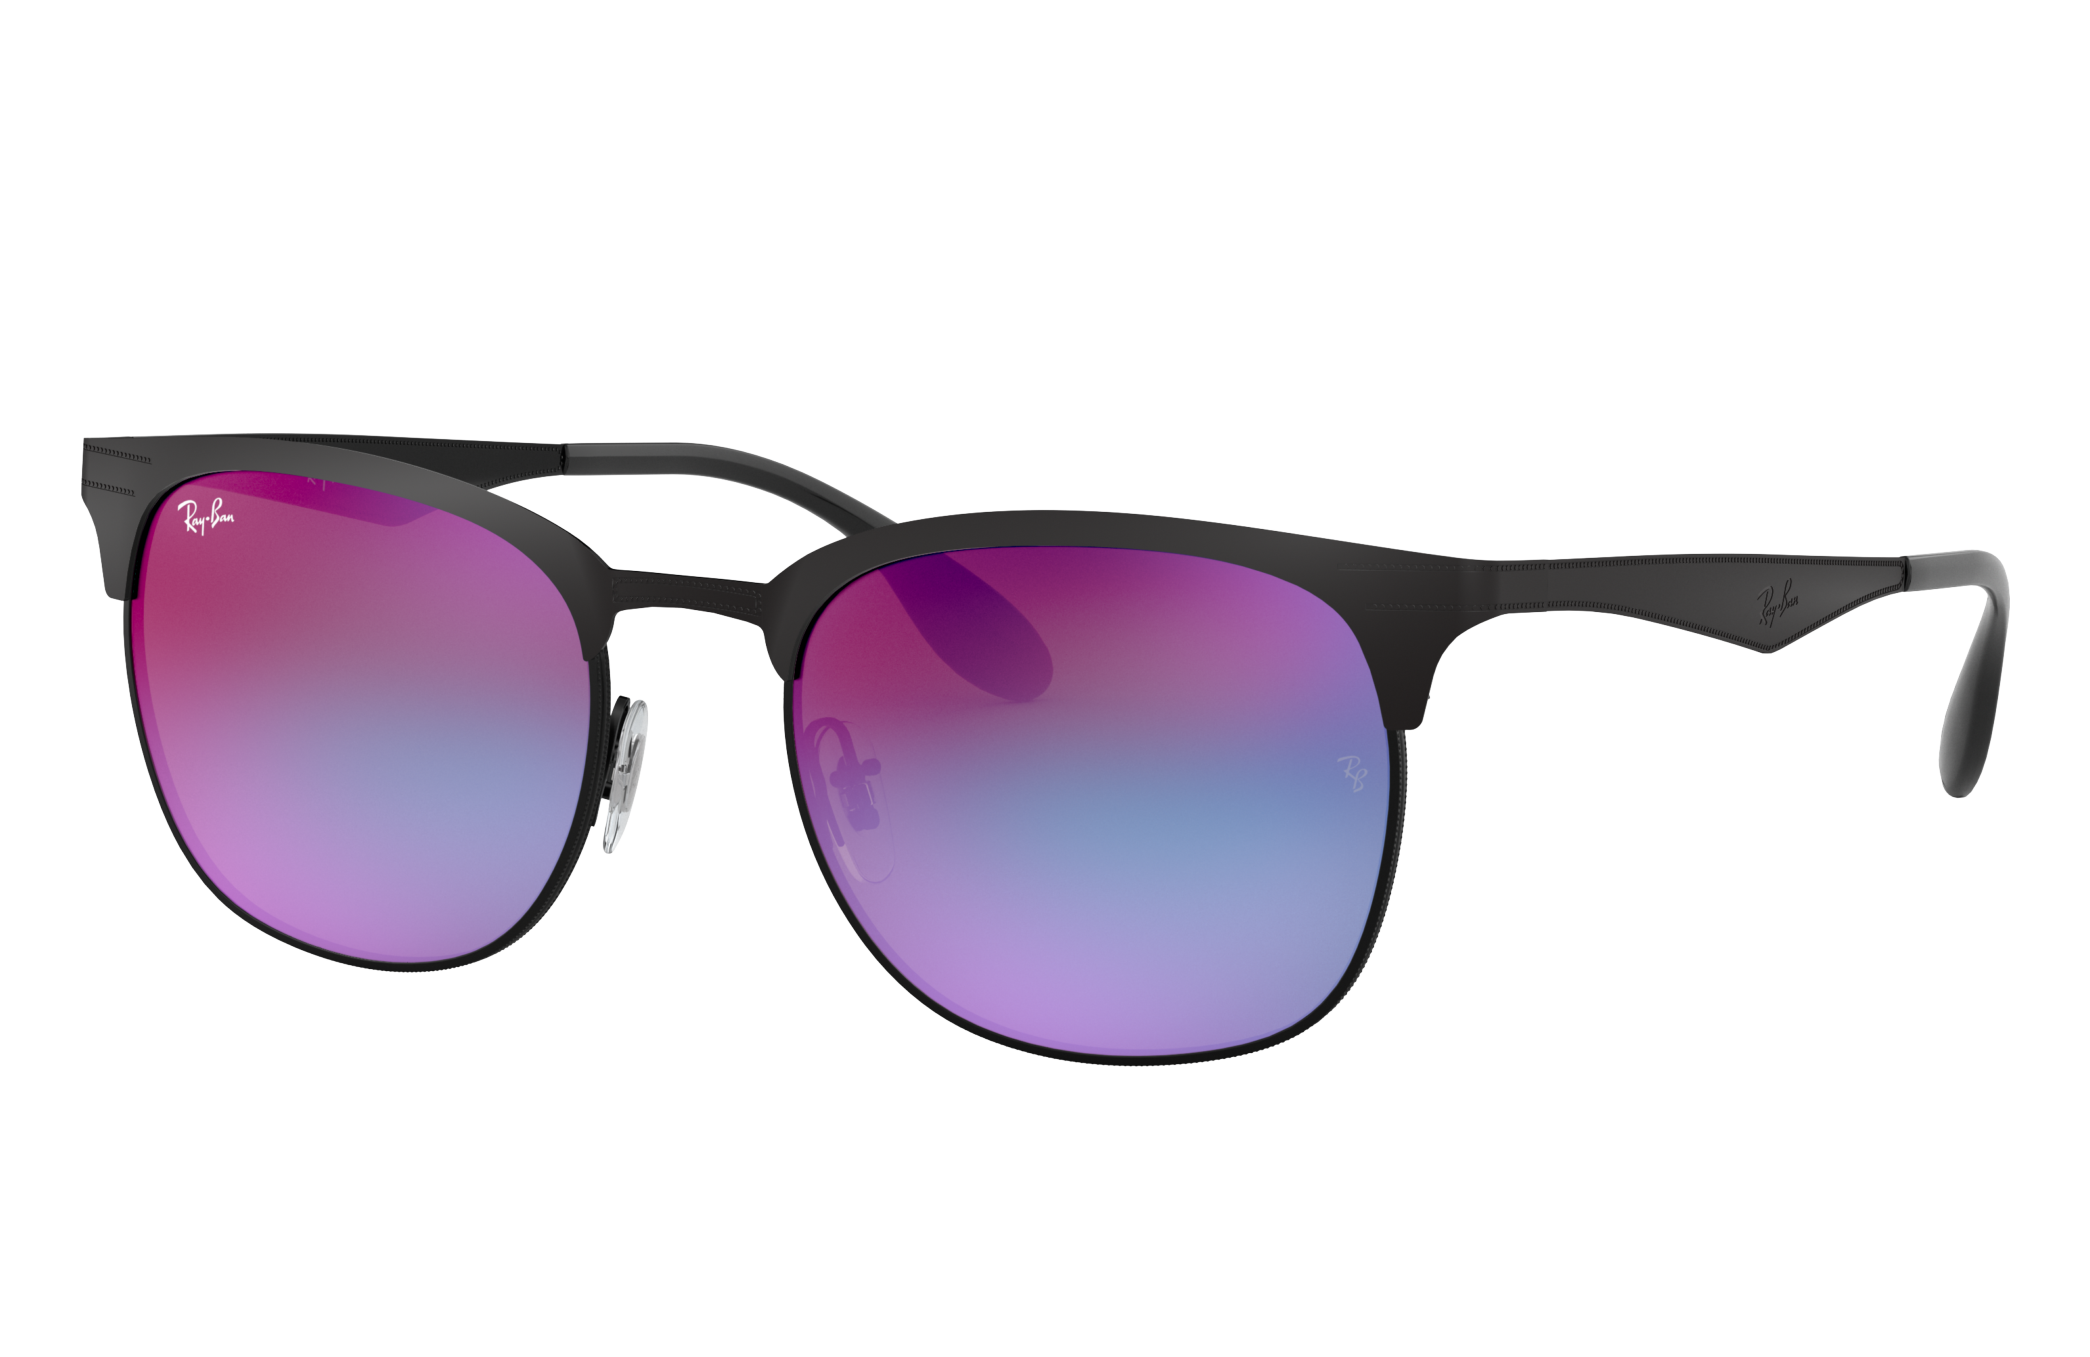 Rb3538 Sunglasses in Black and Blue/Violet | Ray-Ban®